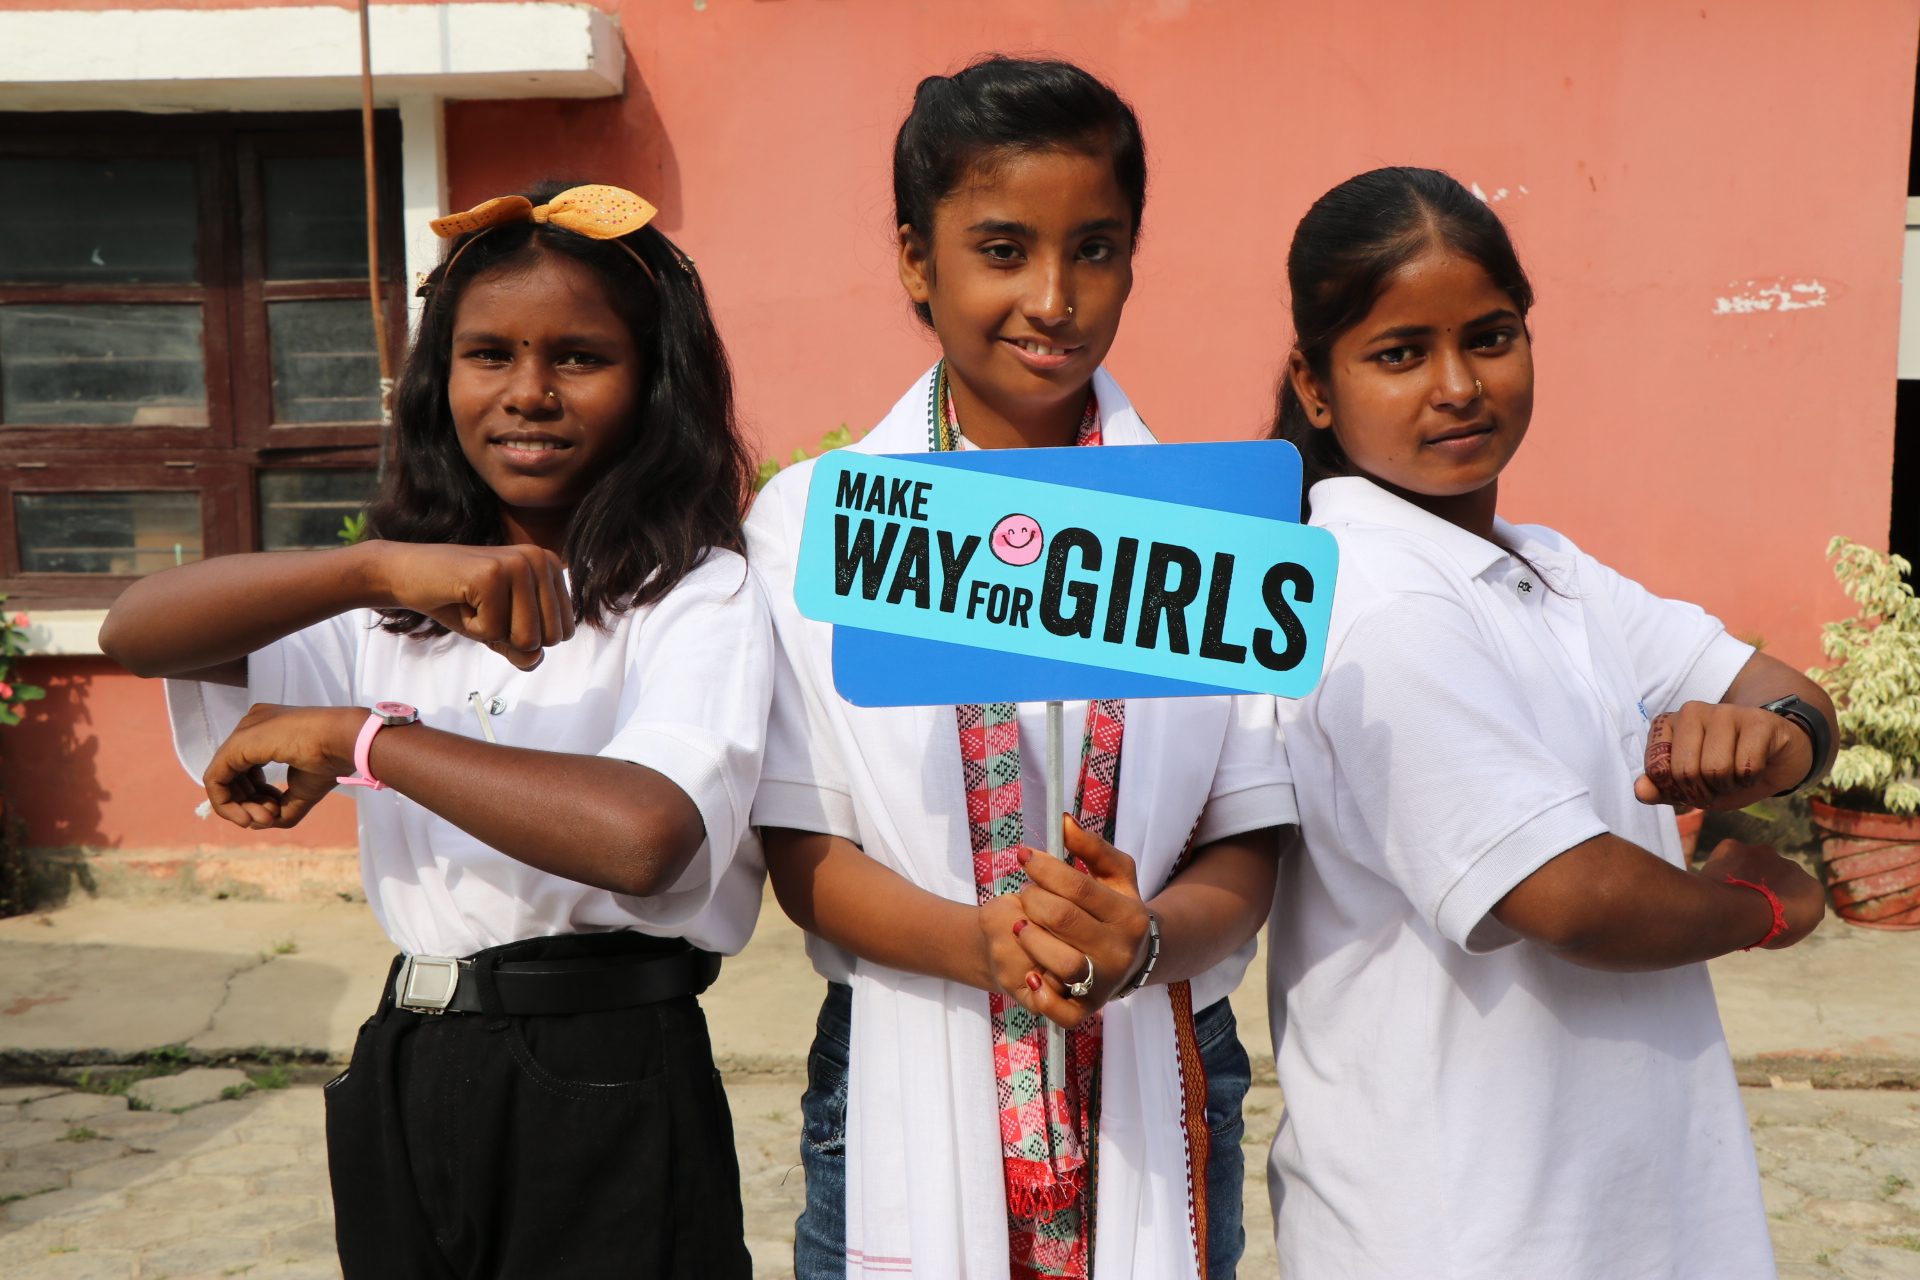 Rajina in the middle holding a placard "Make way for girls."